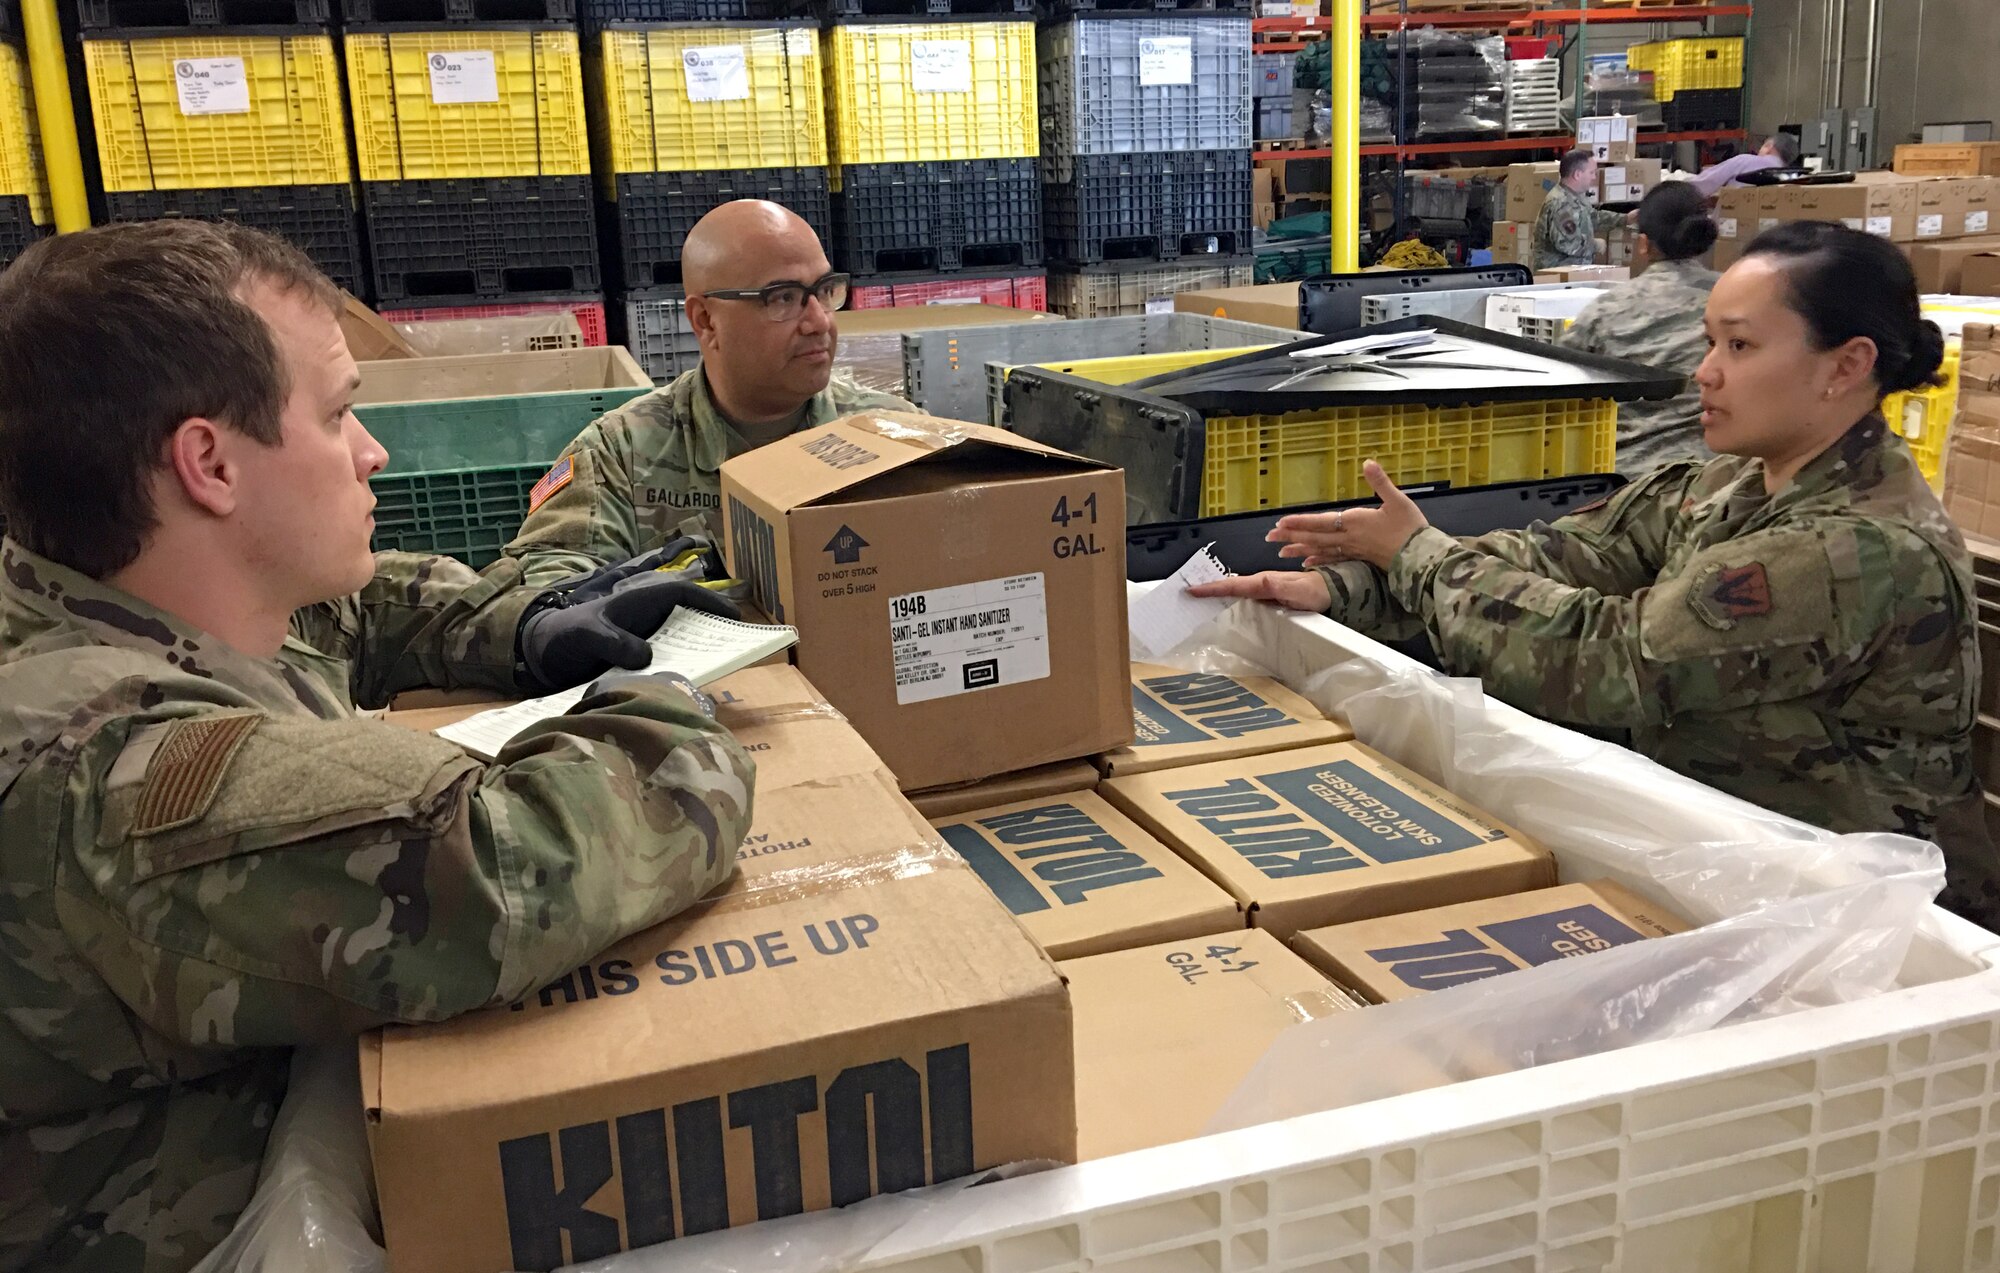 The California National Guard’s Senior Airman Mikel Chatelle, 144th Fighter Wing, Army Staff Sgt. Ivan Gallardo, Medical Detachment, and Air Force Staff Sgt. Alice Nitzsche, 144th Fighter Wing, discuss plans on how to organize medical supplies for distribution at the California Emergency Medical Services Authority facility March 20, 2020 in Sacramento, California.